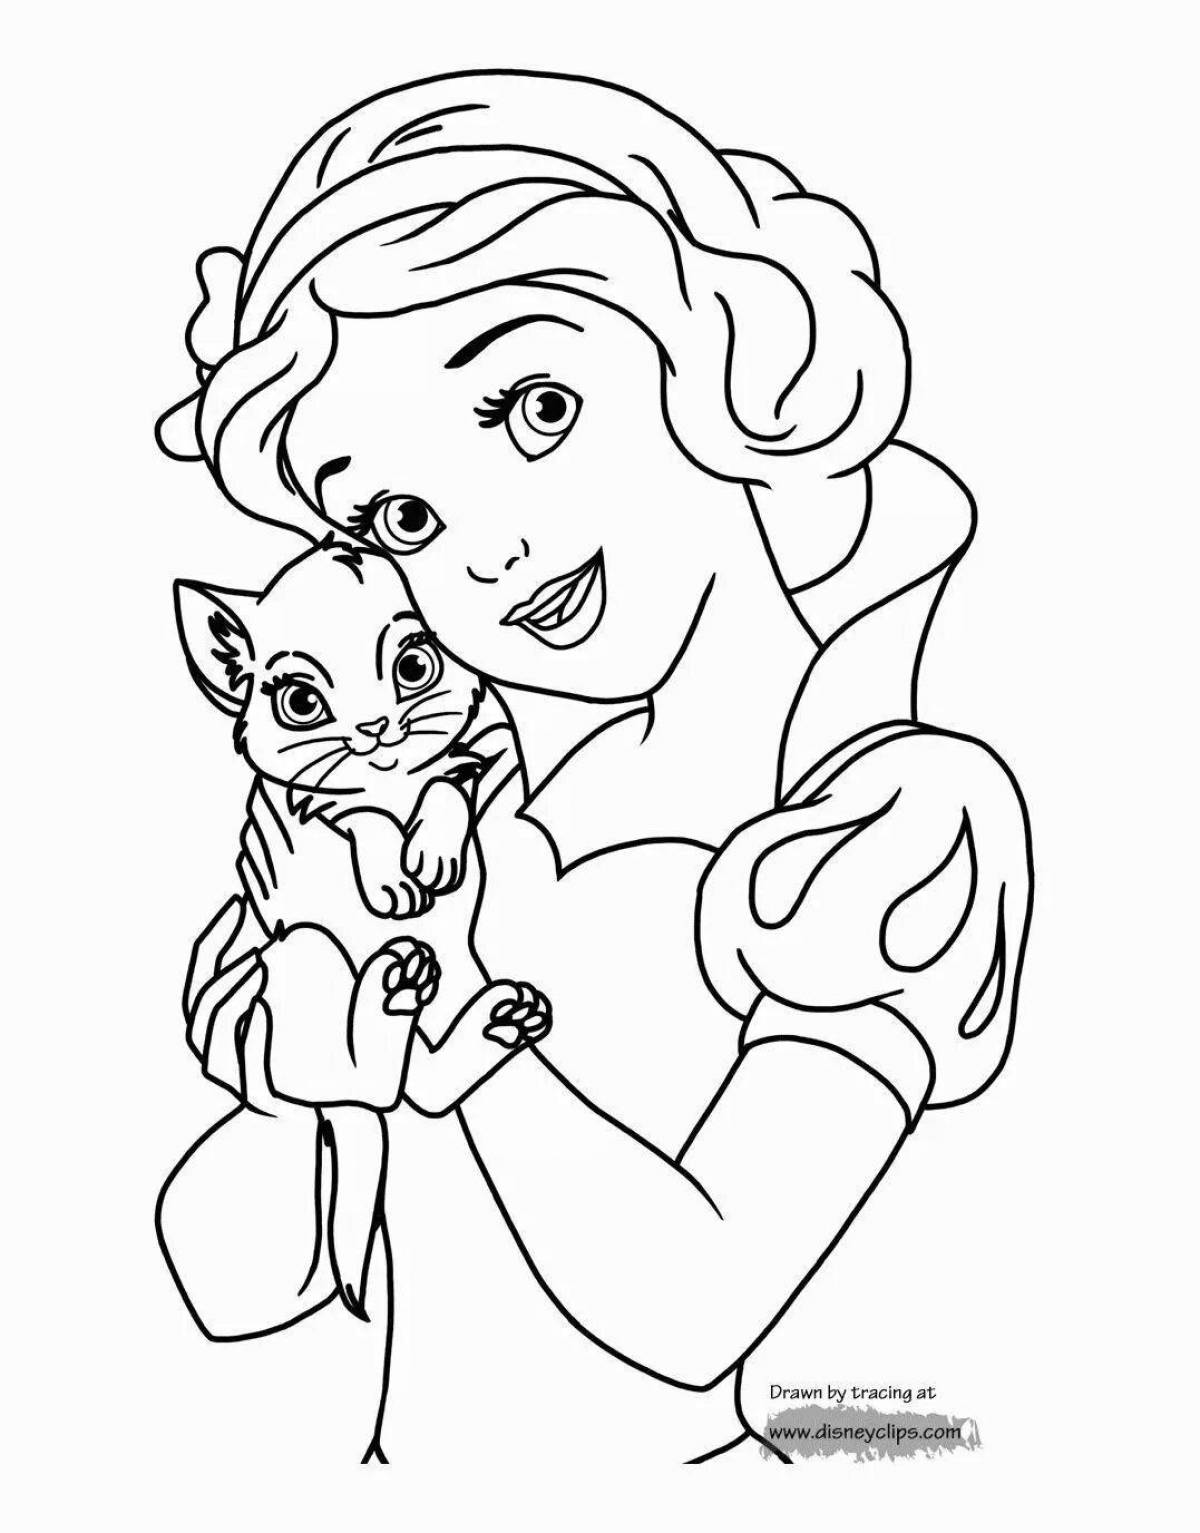 Amazing cartoon princess coloring pages